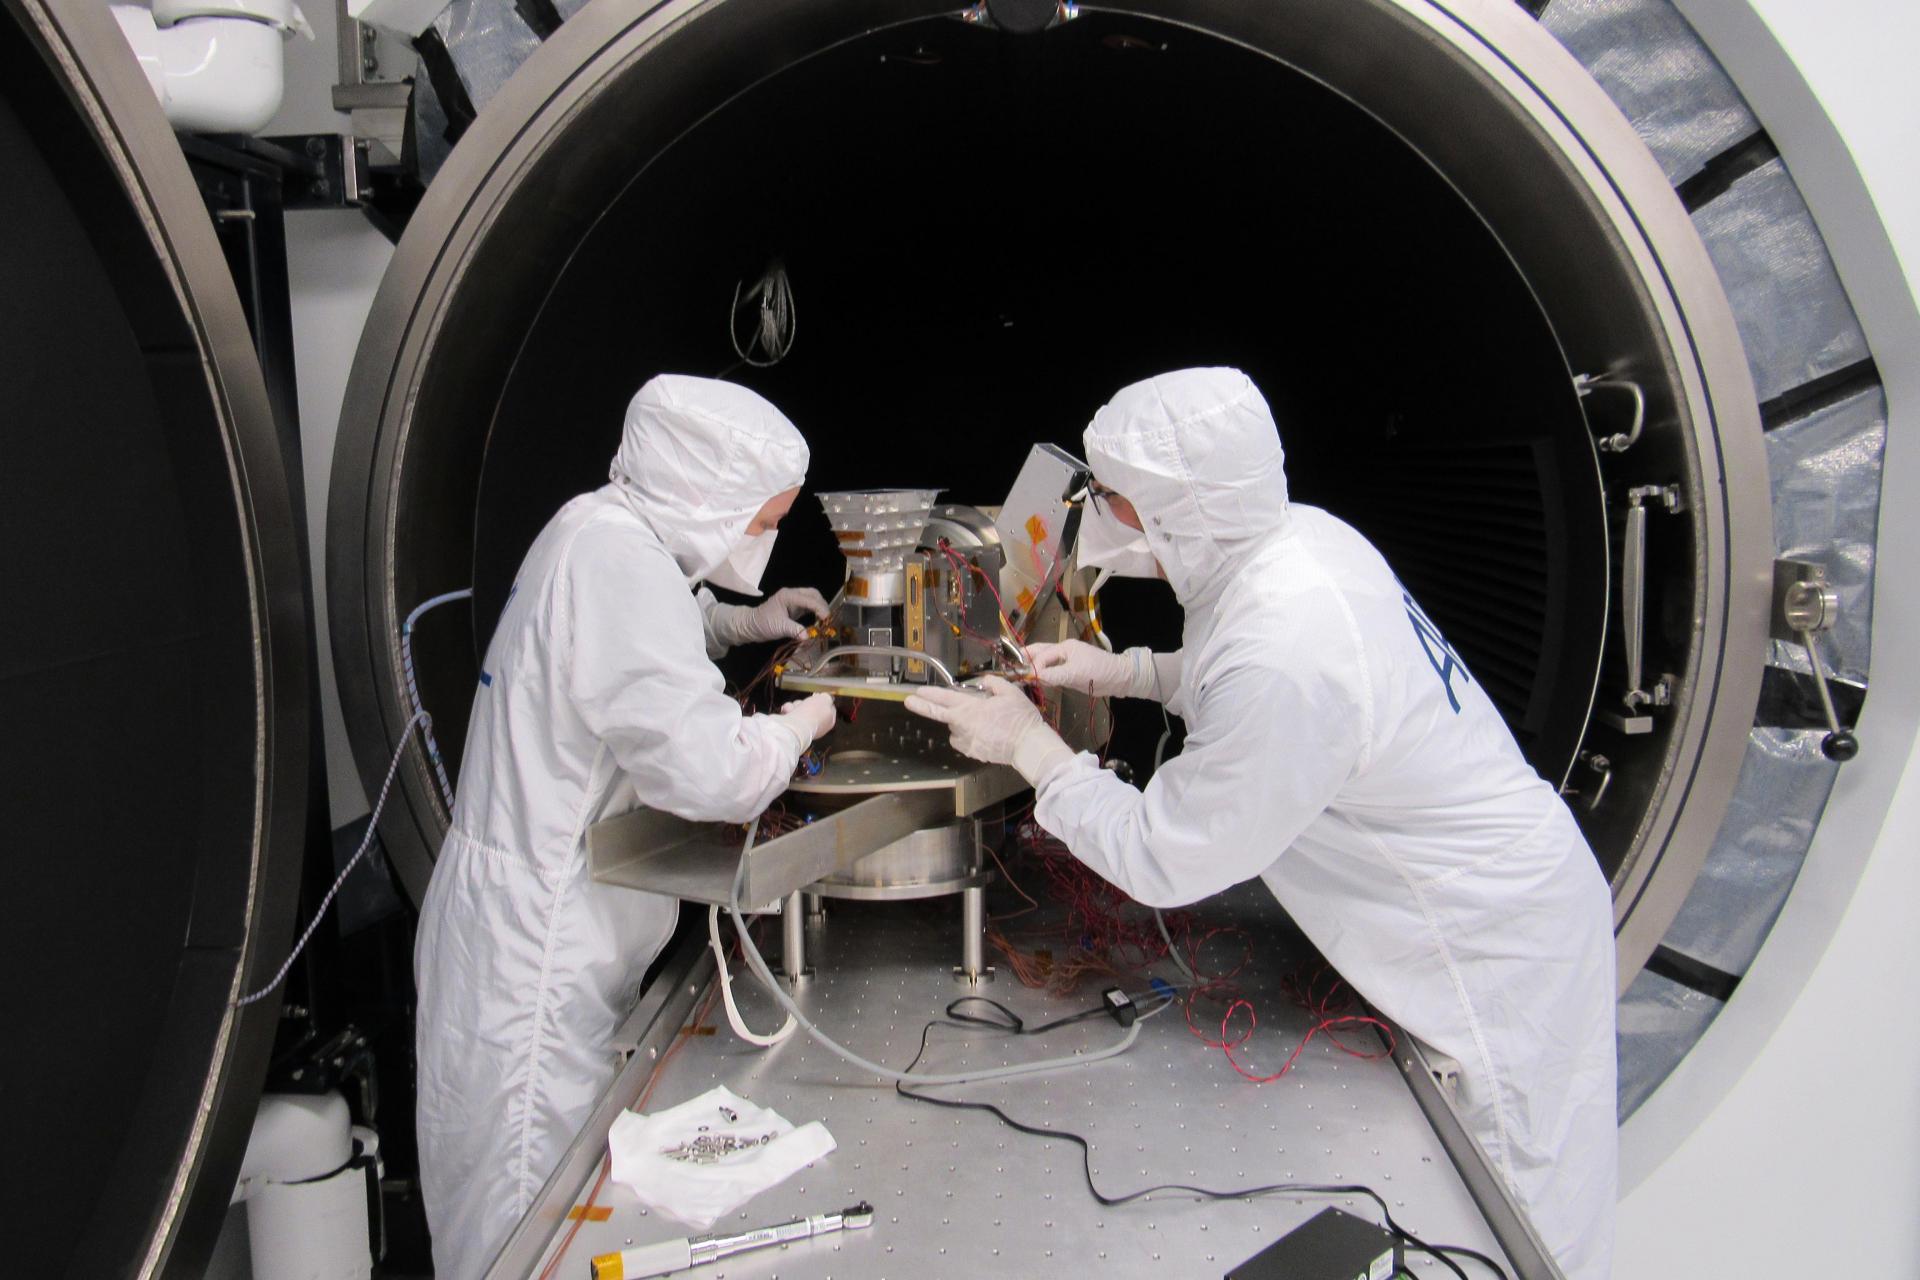 Two people in white clean suits work on an instrument 